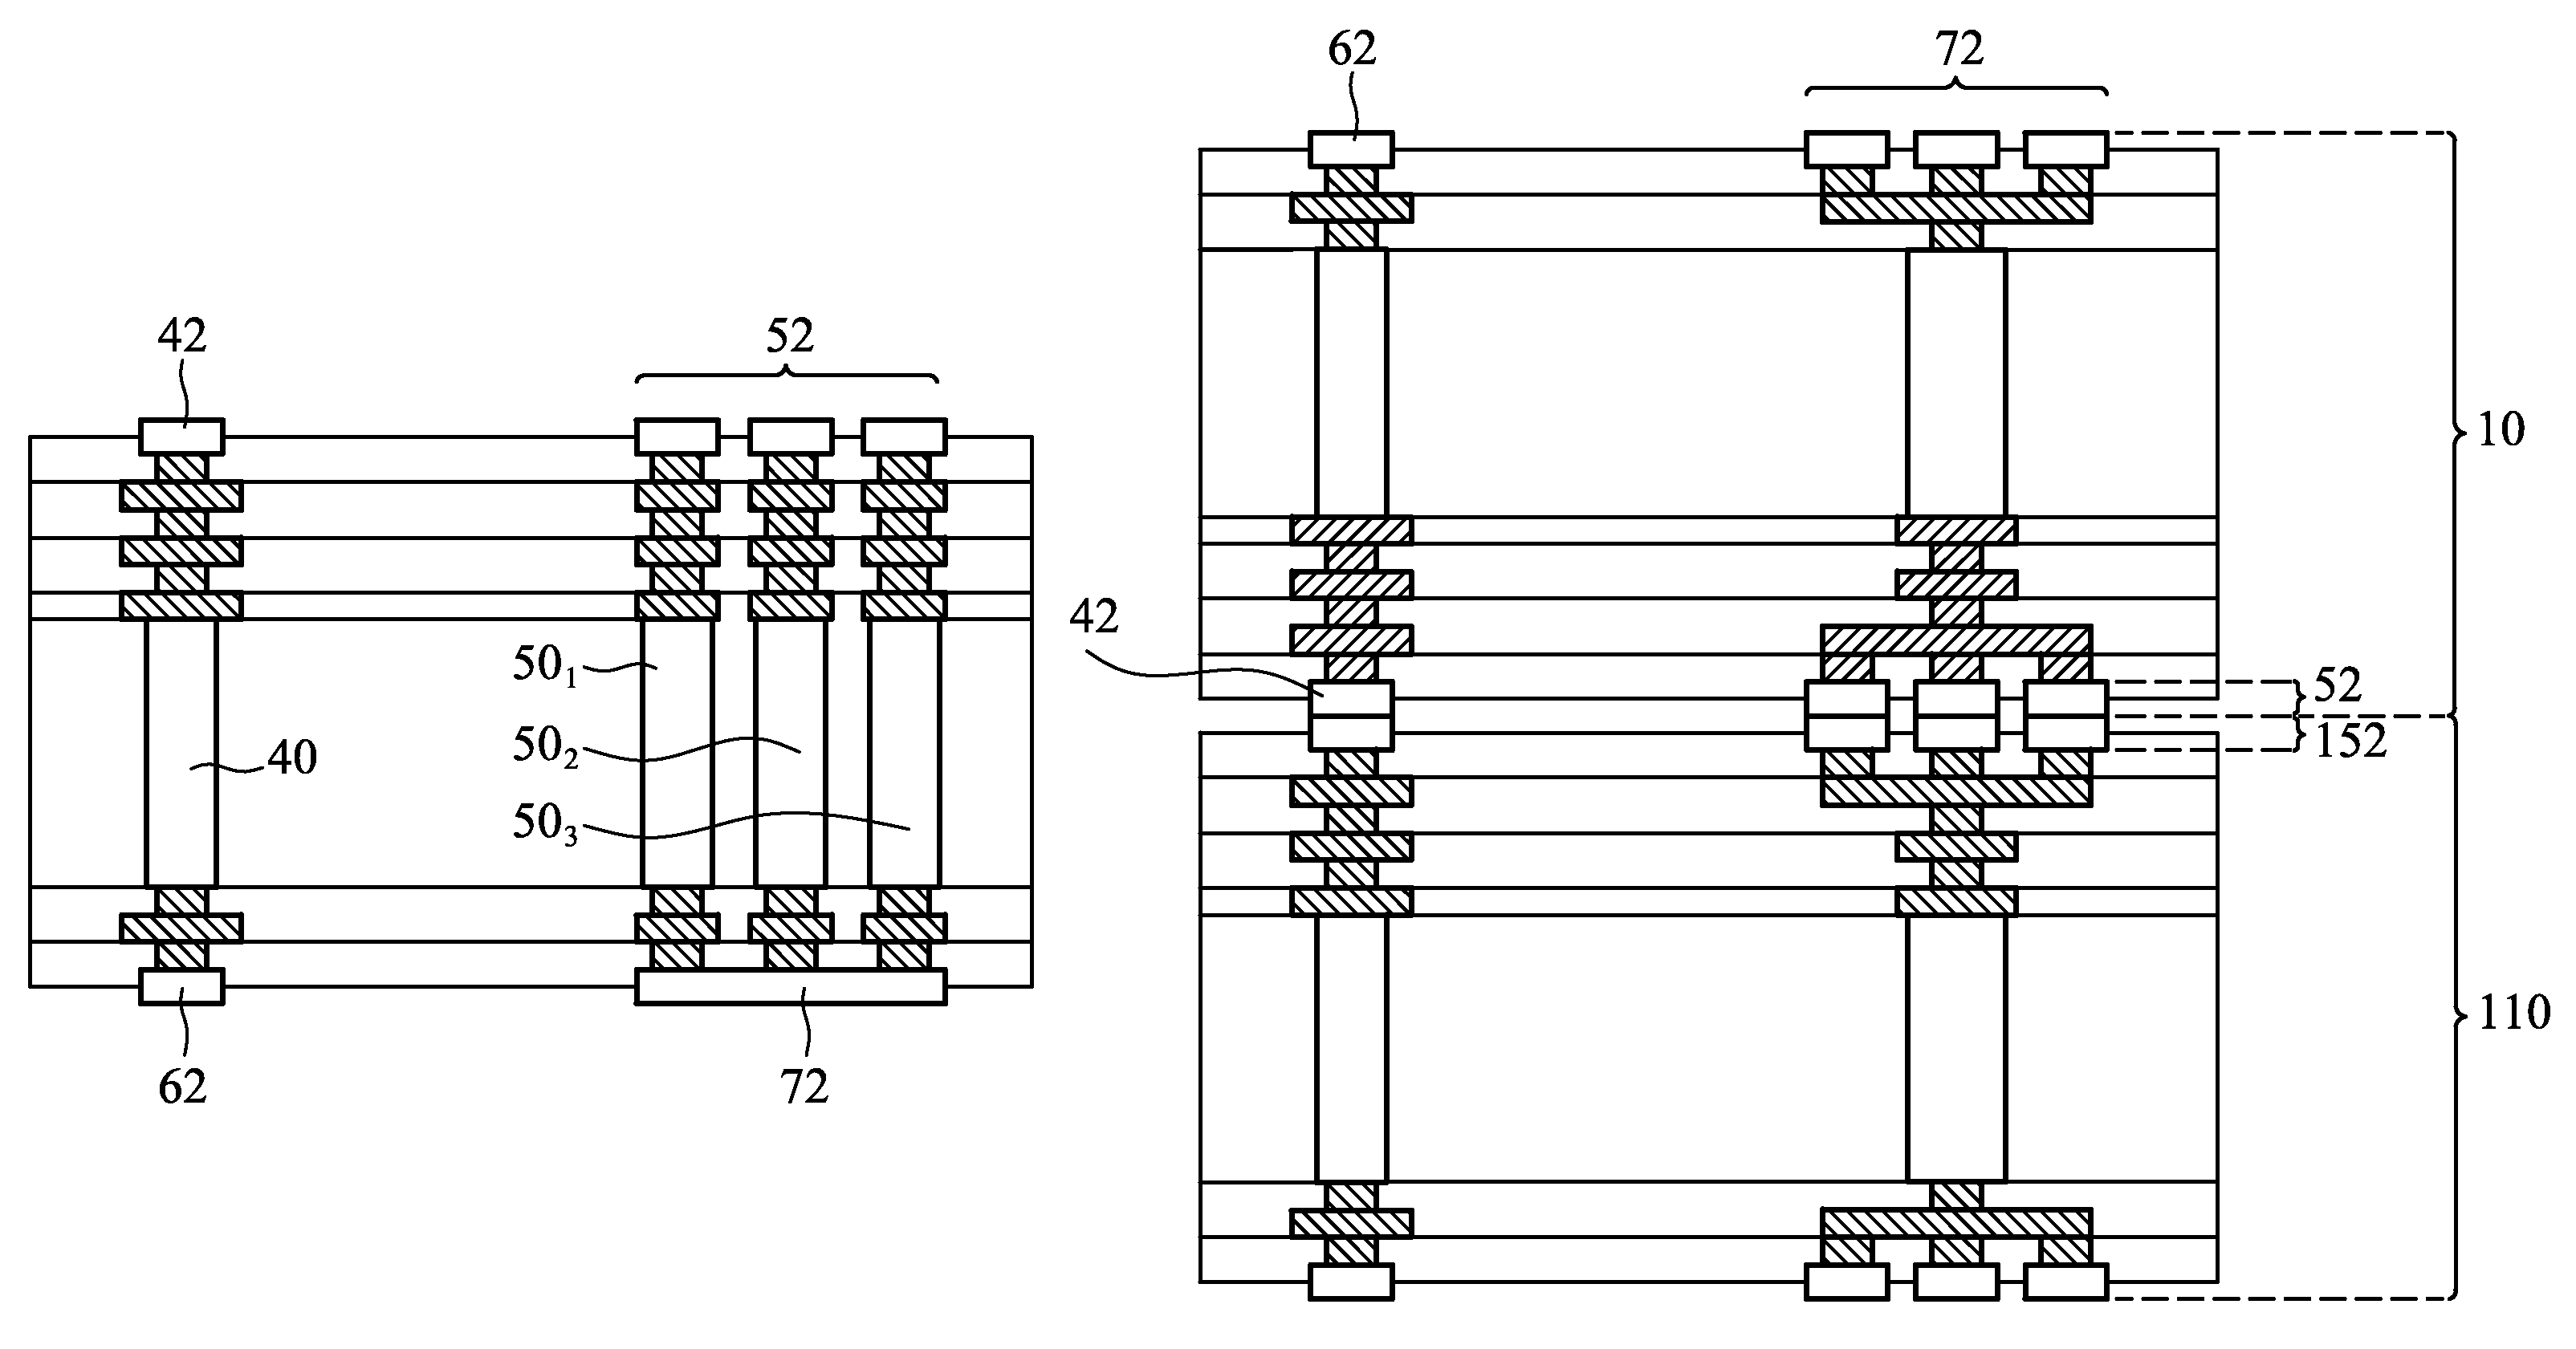 Through-substrate vias (TSVs) electrically connected to a bond pad design with reduced dishing effect